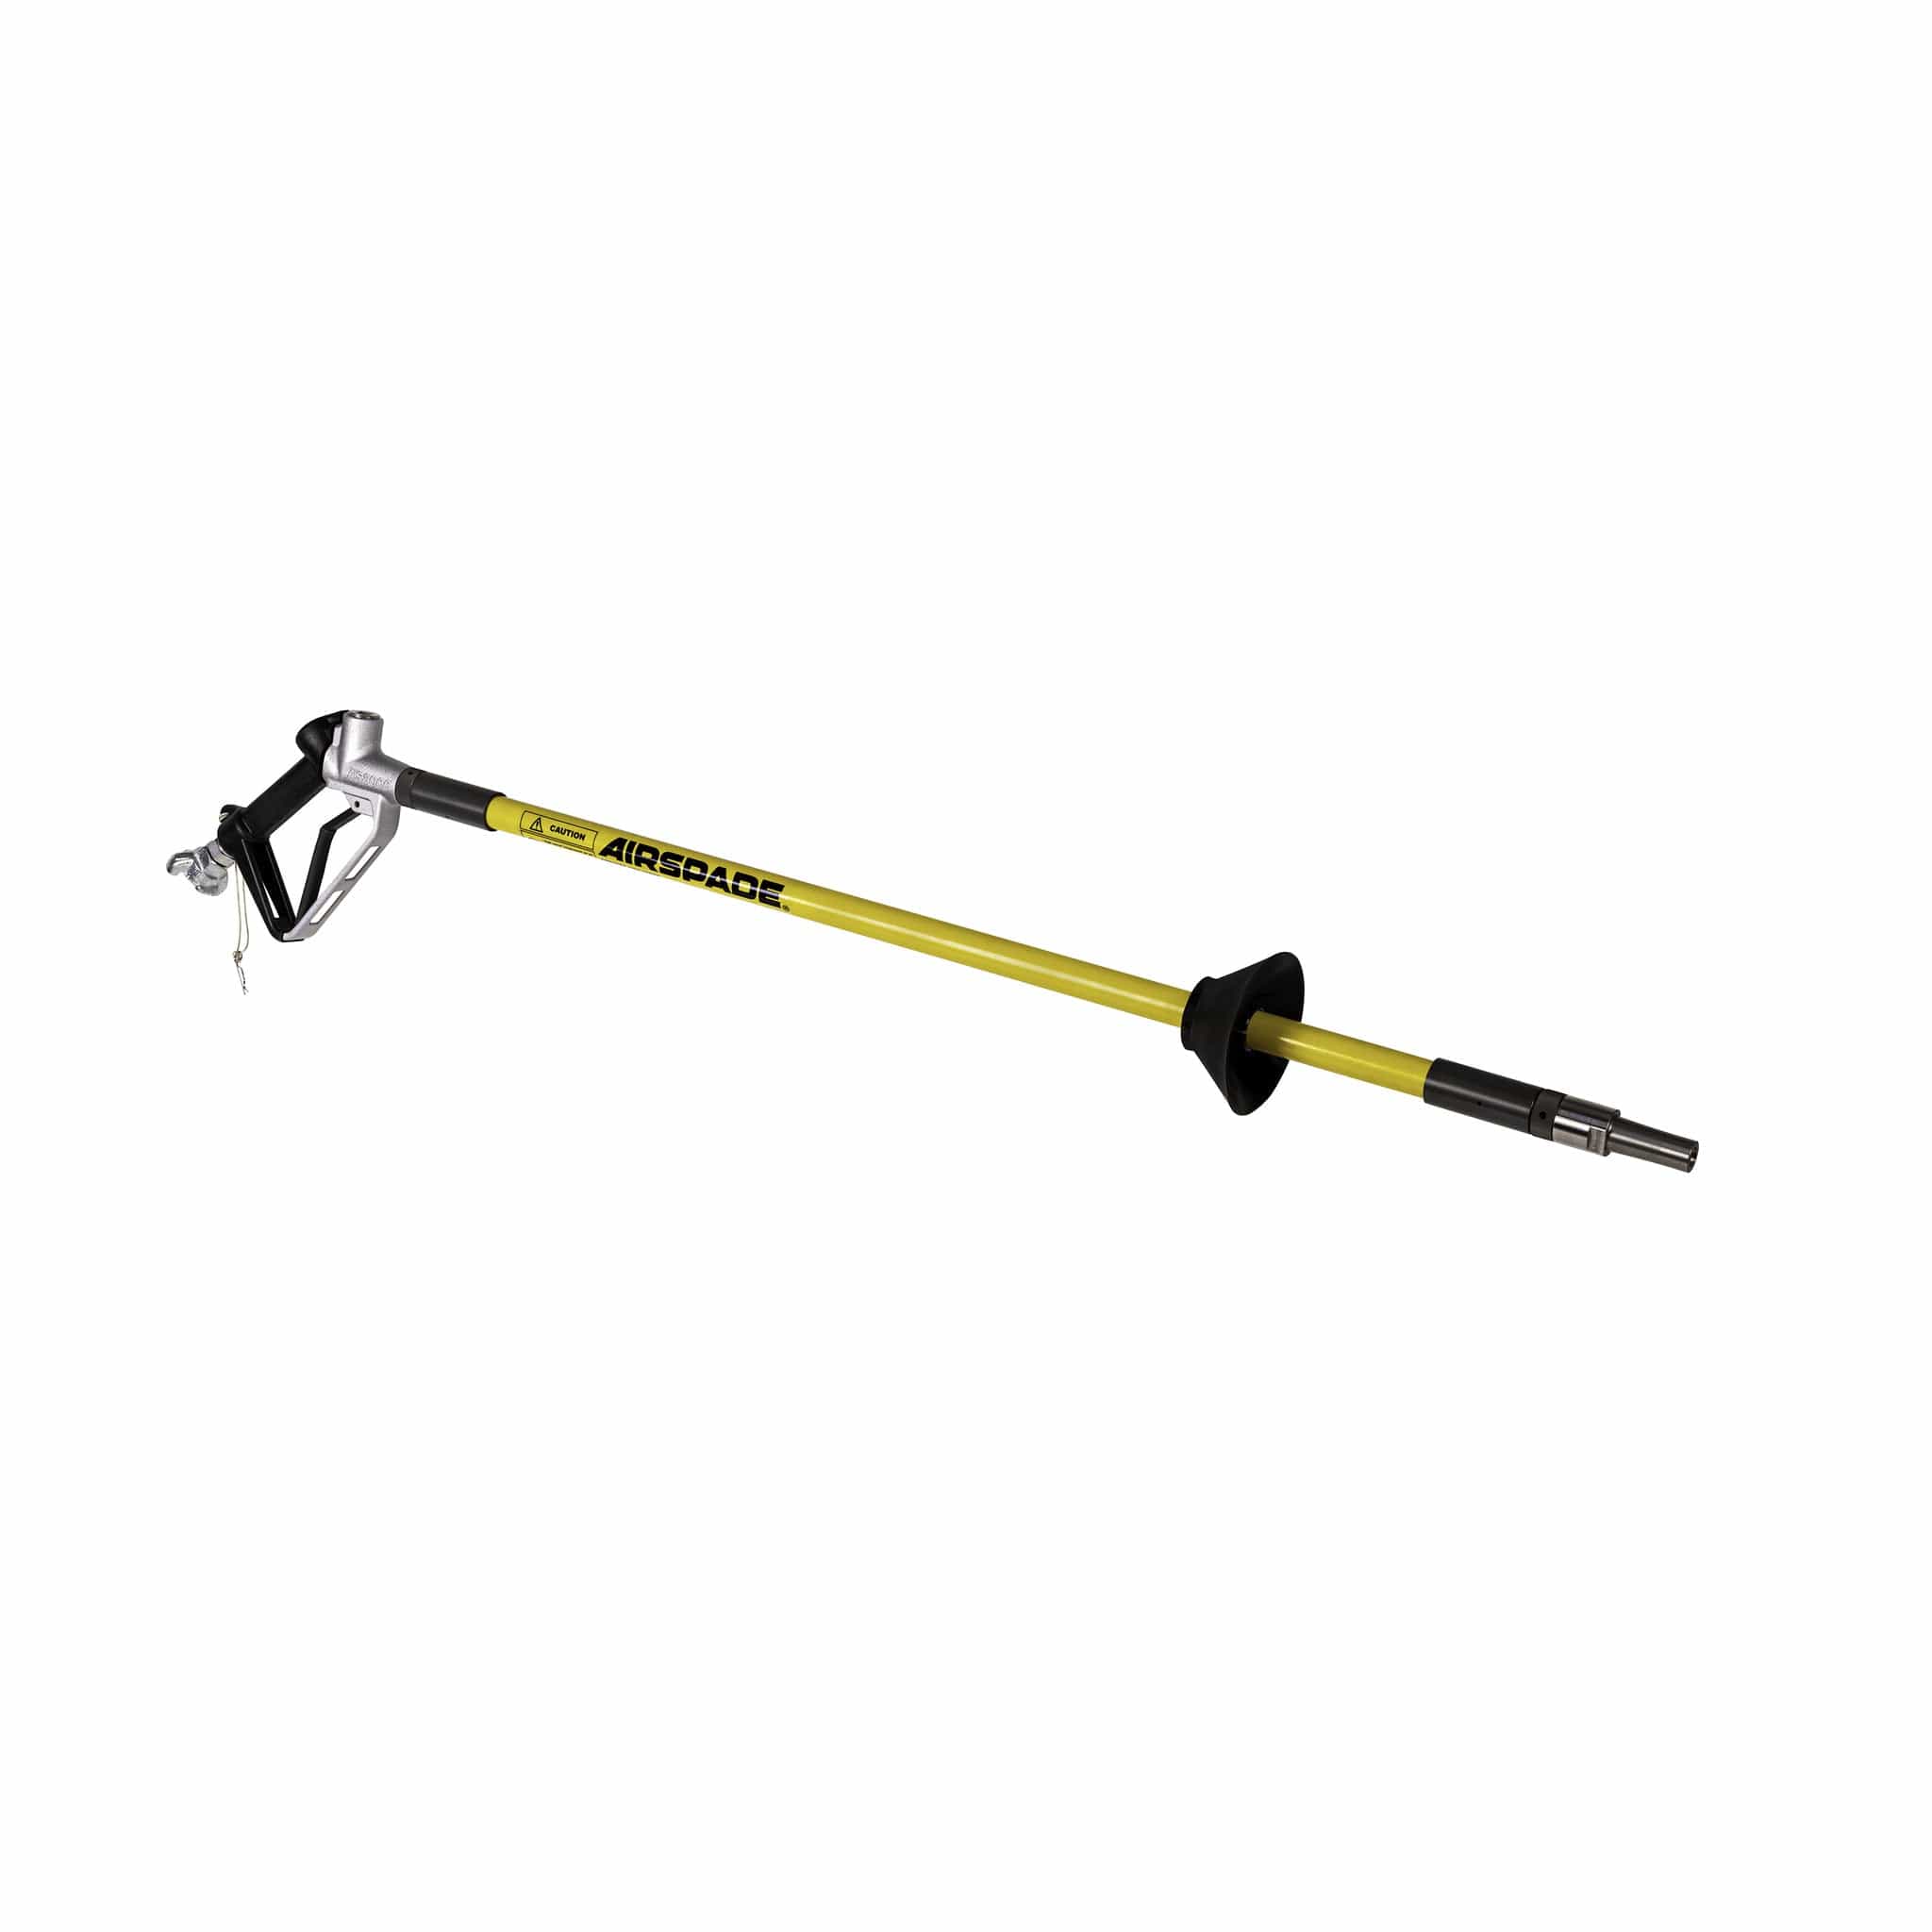 AirSpade 2000 Construction Kit - 105 cfm with 4 Ft Barrel & 3 Ft Extension (HT114)